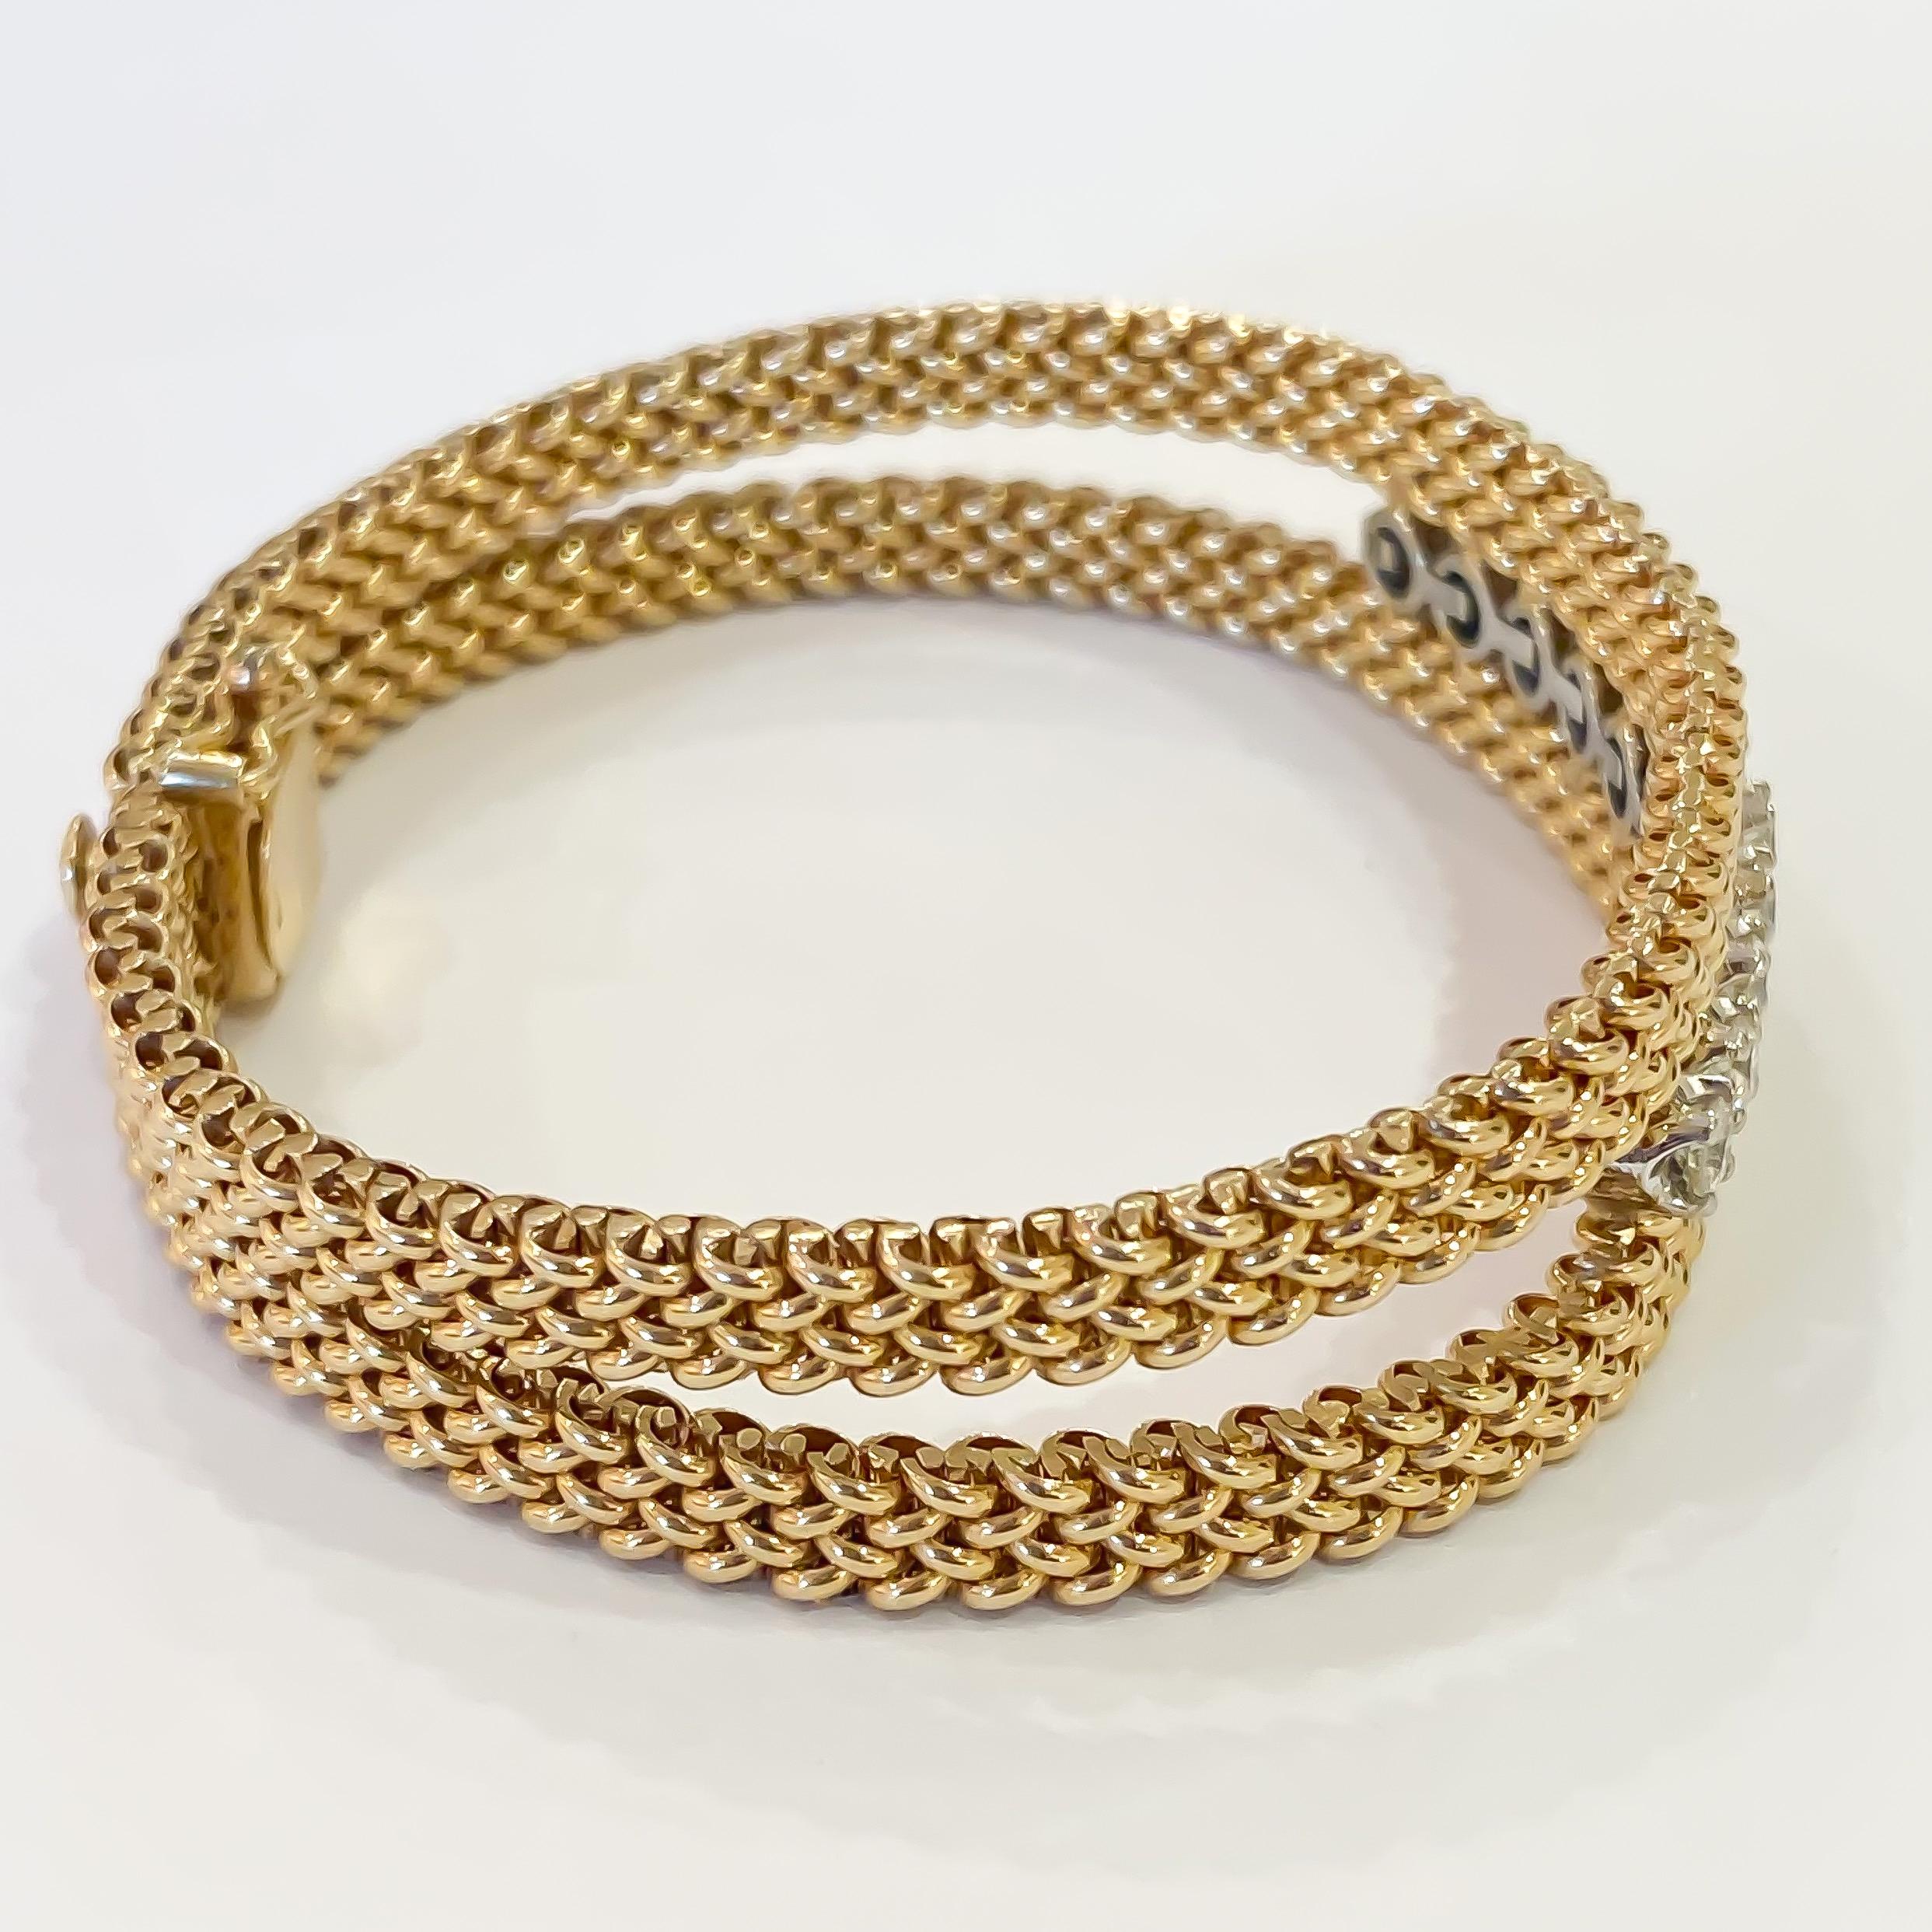 Estate diamond bracelet designed in 14 karat yellow gold. Two rows of intricate woven mesh set with ten round brilliant cut diamonds set in four prong heads. The bracelet measures 13.50mm at the widest point tapering to 9mm at the clasp. Each